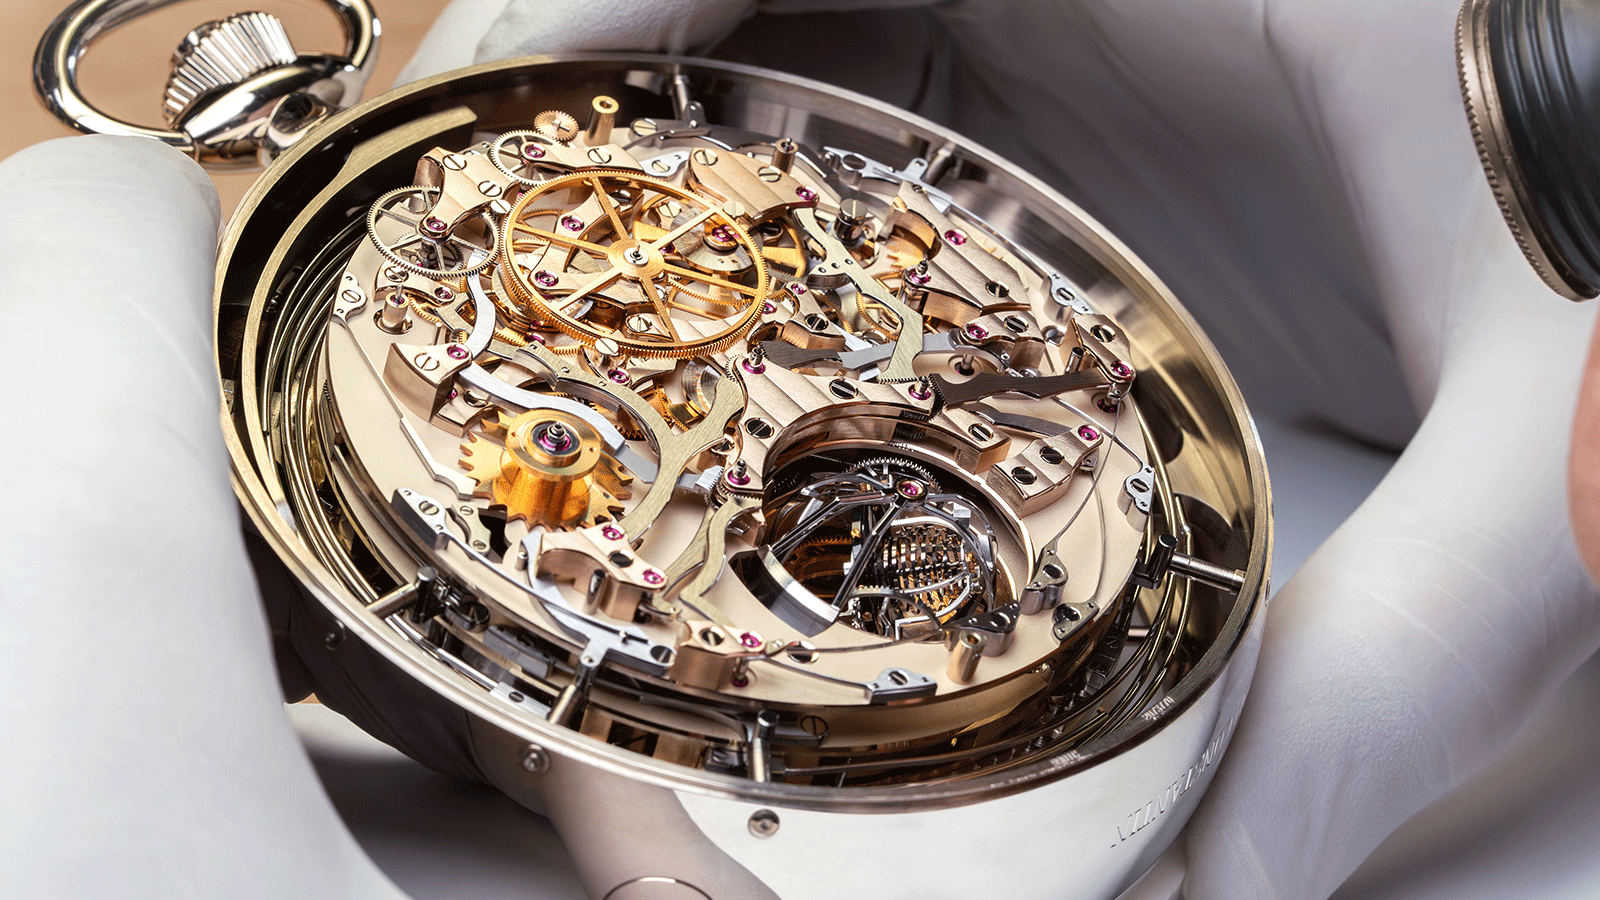 The watchmakers in charge of assembling the timepiece – and who also did most of the decoration – therefore had to be extremely meticulous. The result is a watch whose complexity contributes to its overall elegance and harmony.